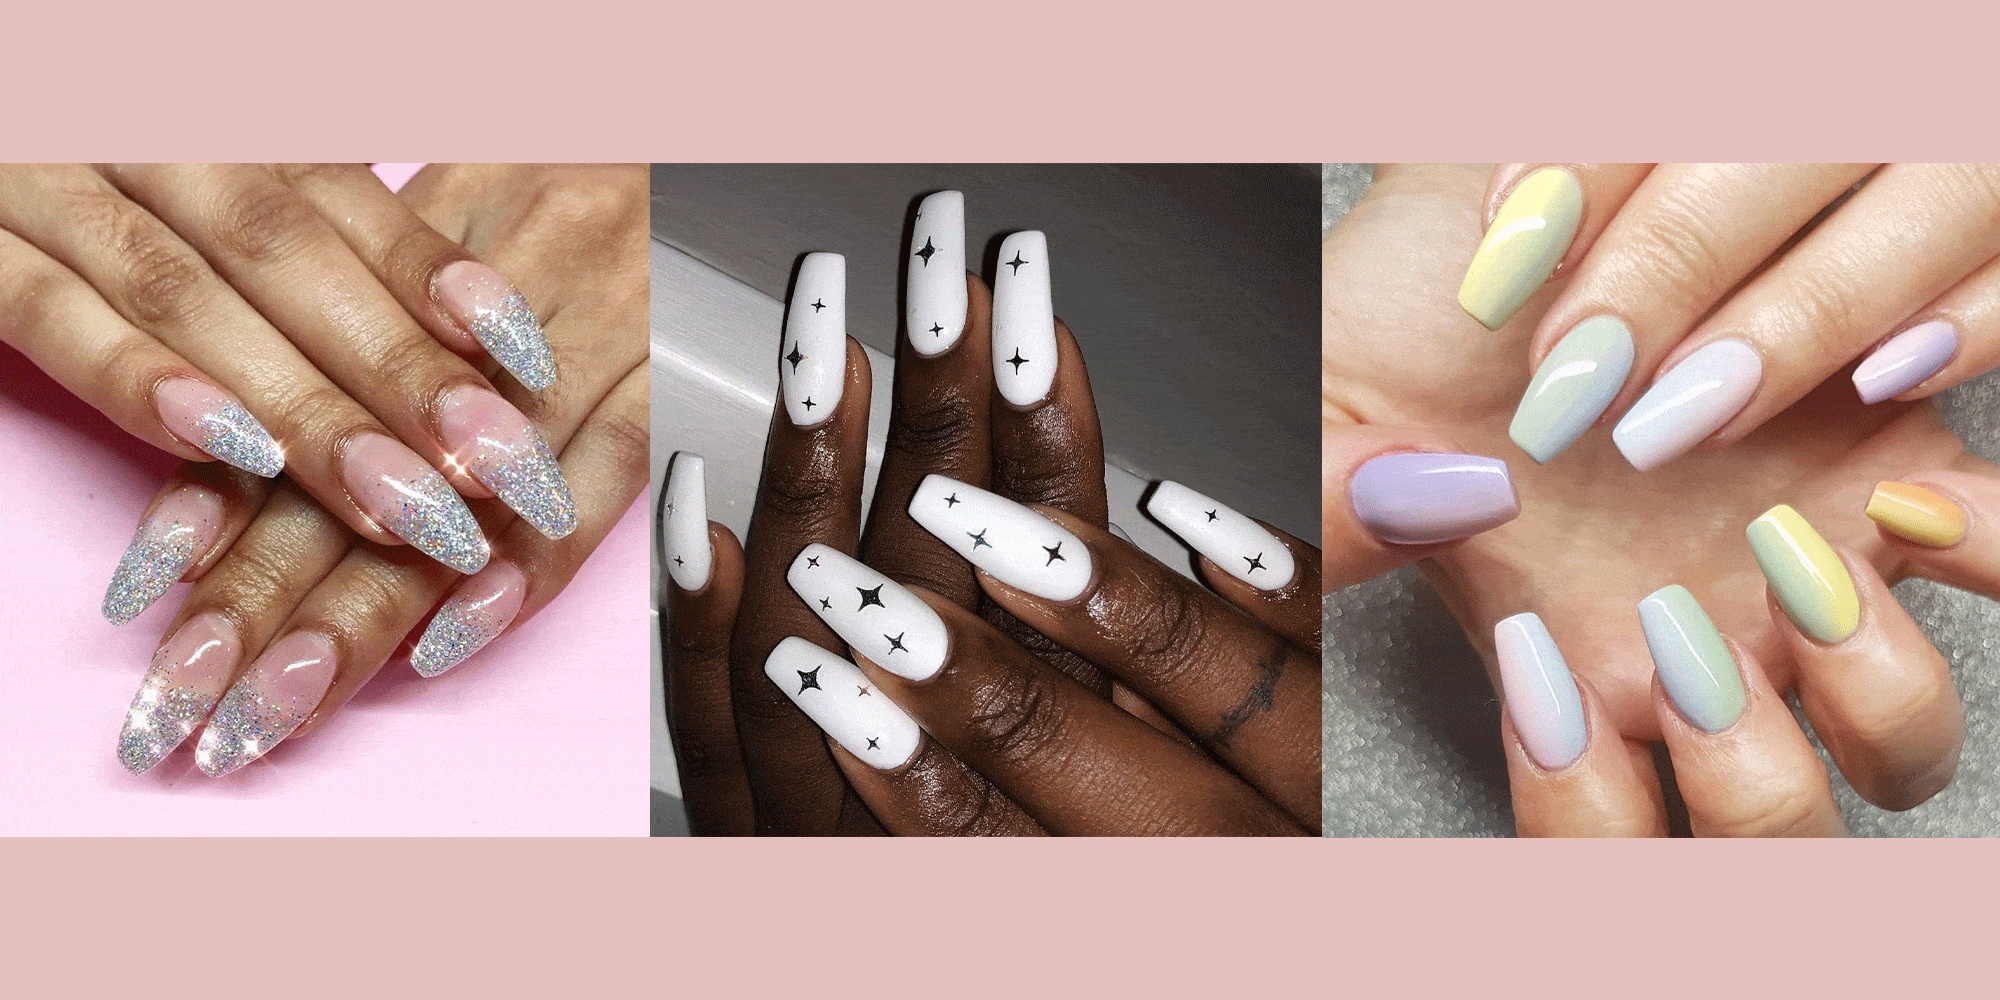 6 Different Acrylic Nail Shapes For You To Choose | by Aleksandrsmolin |  Medium